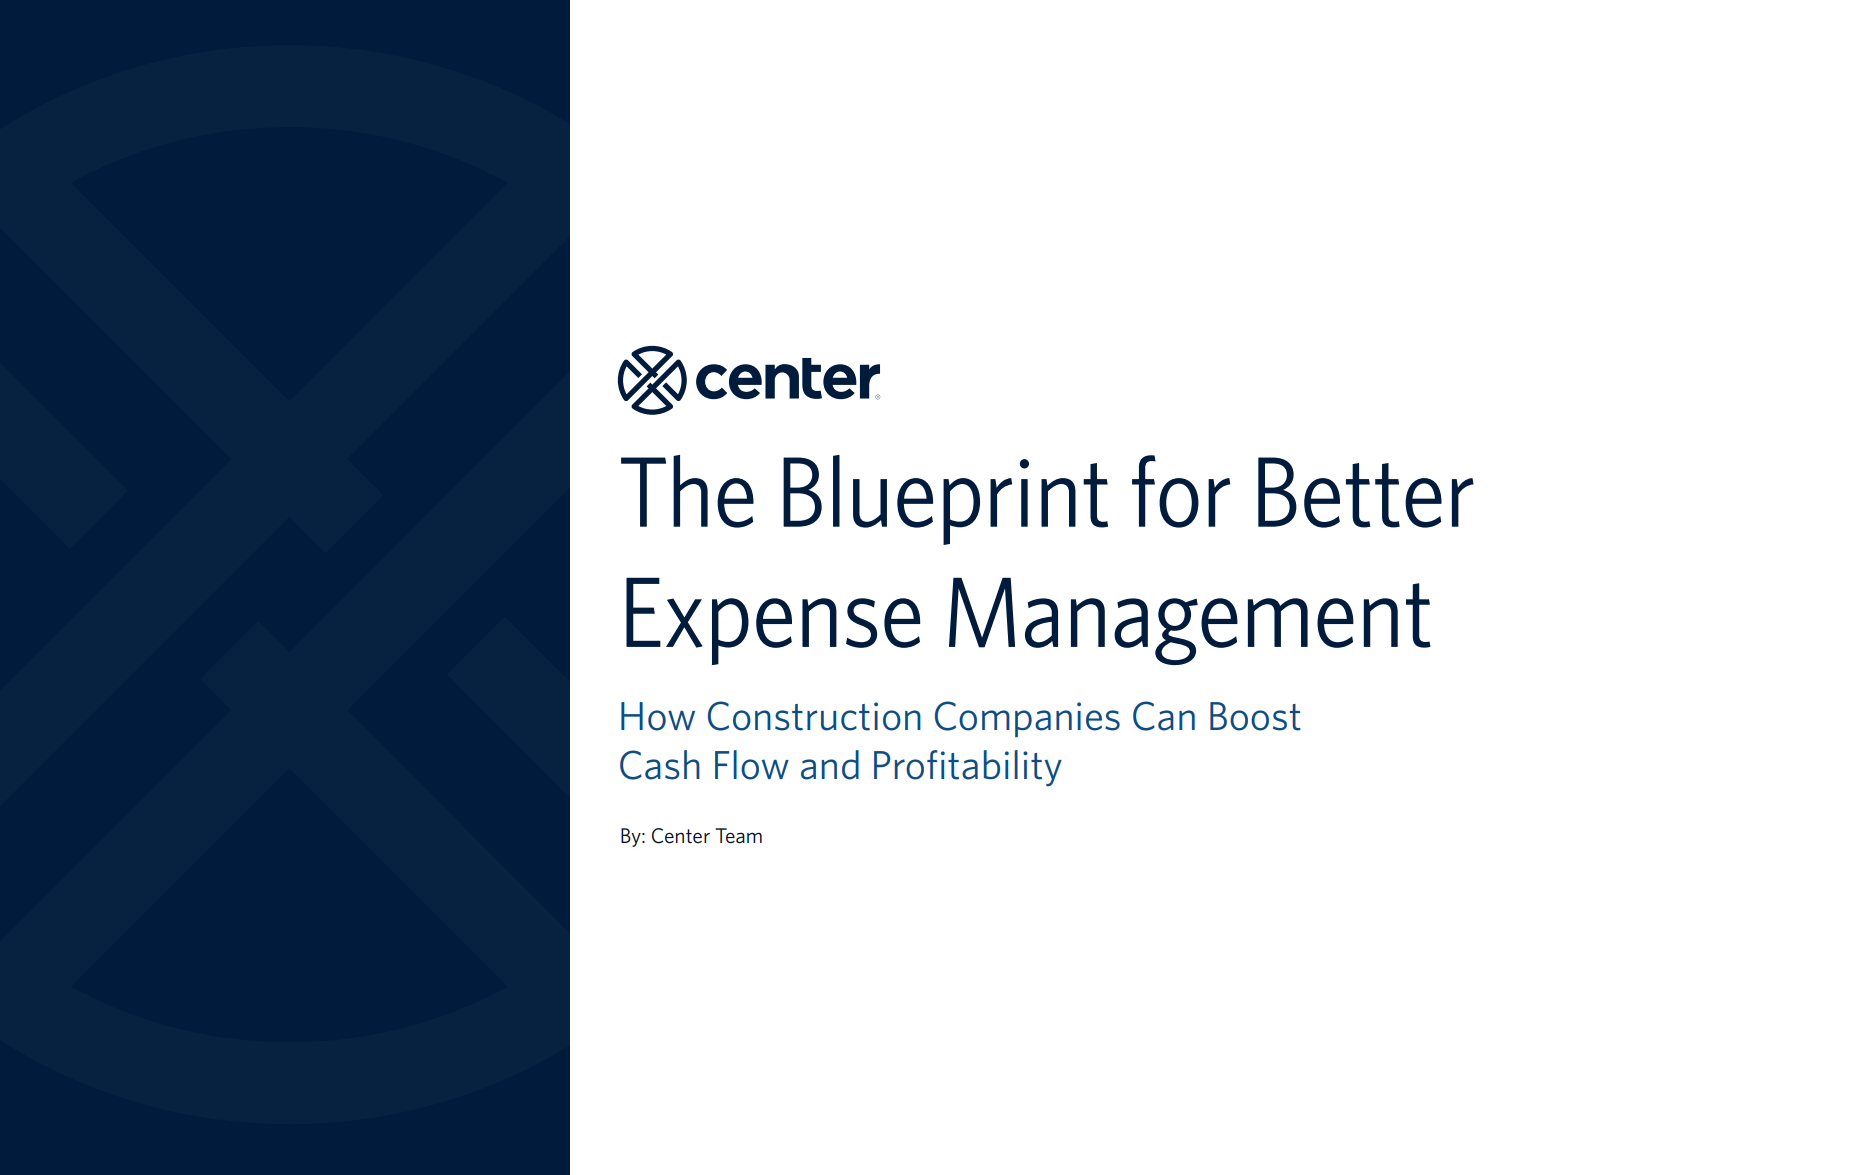 Better Expense Management for Construction Companies